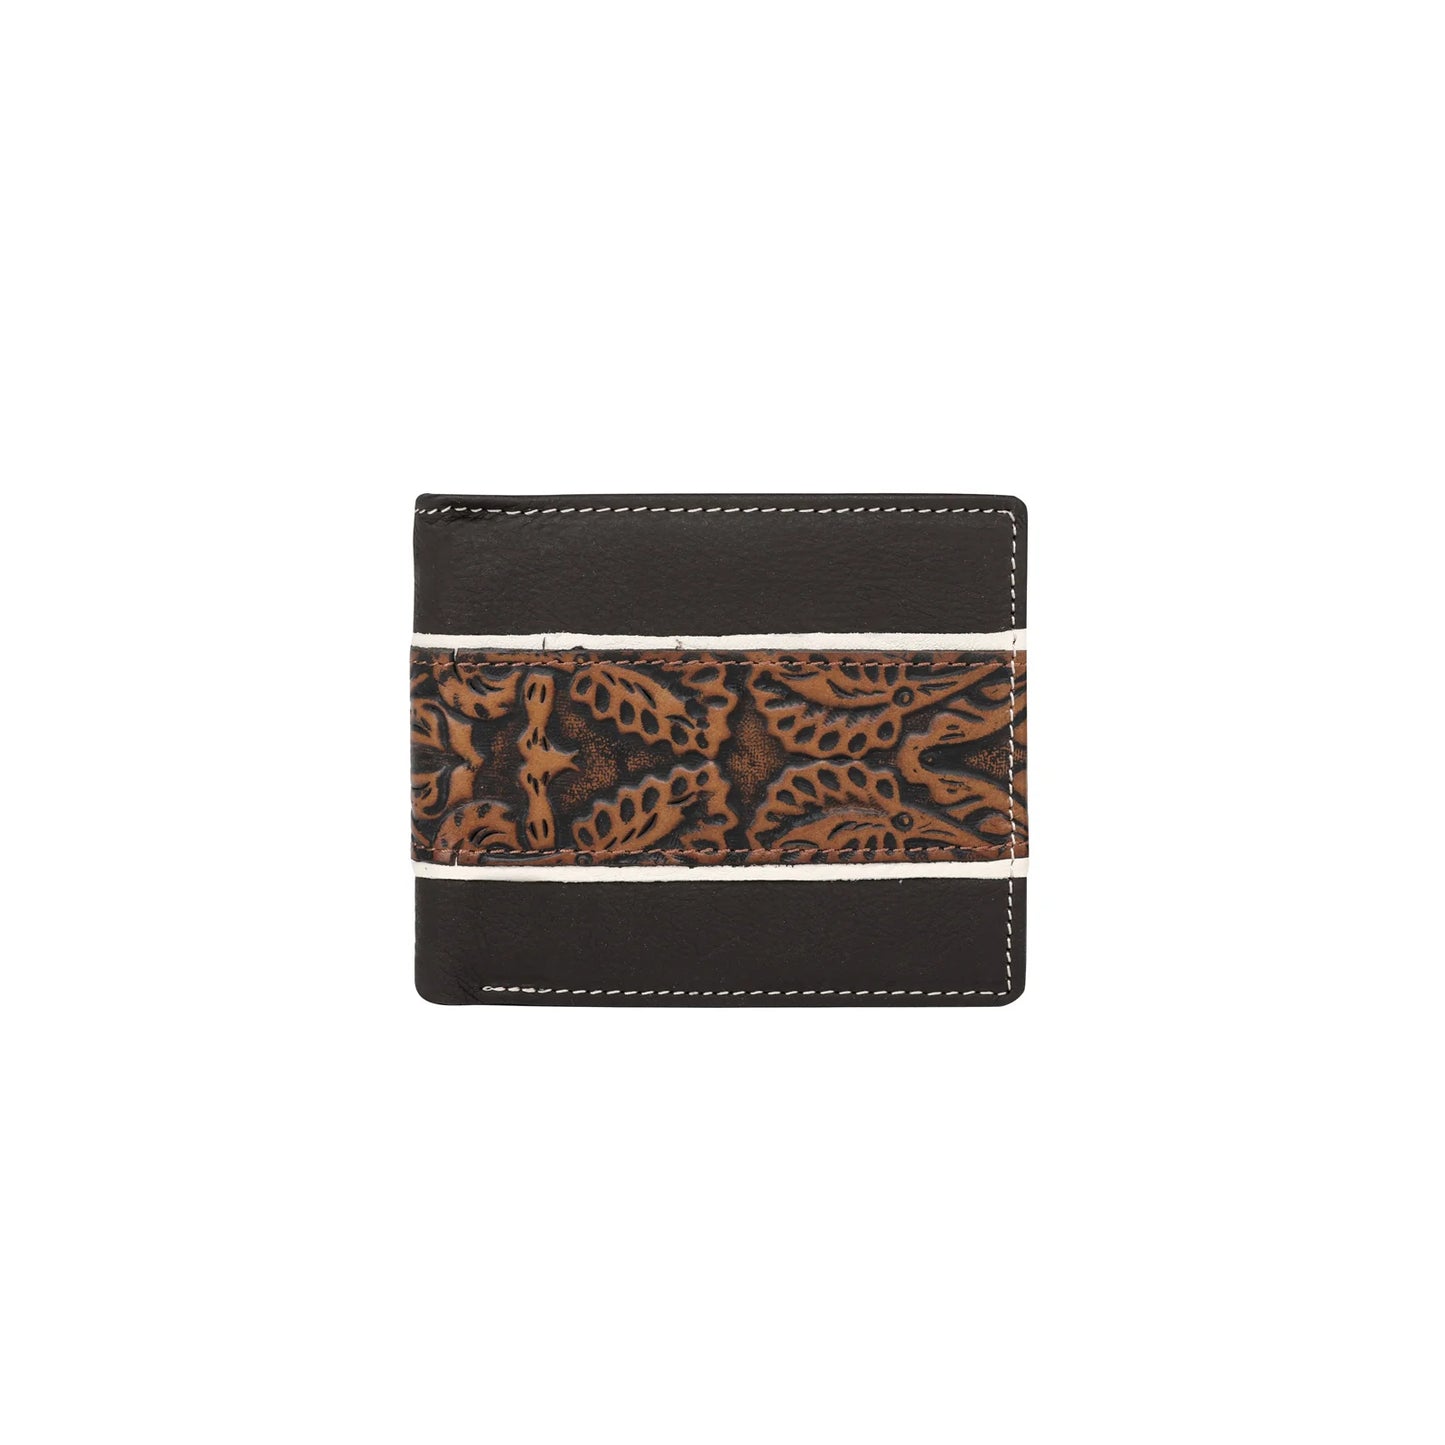 MWSW010 - Genuine Leather Embossed Floral Men's Wallet